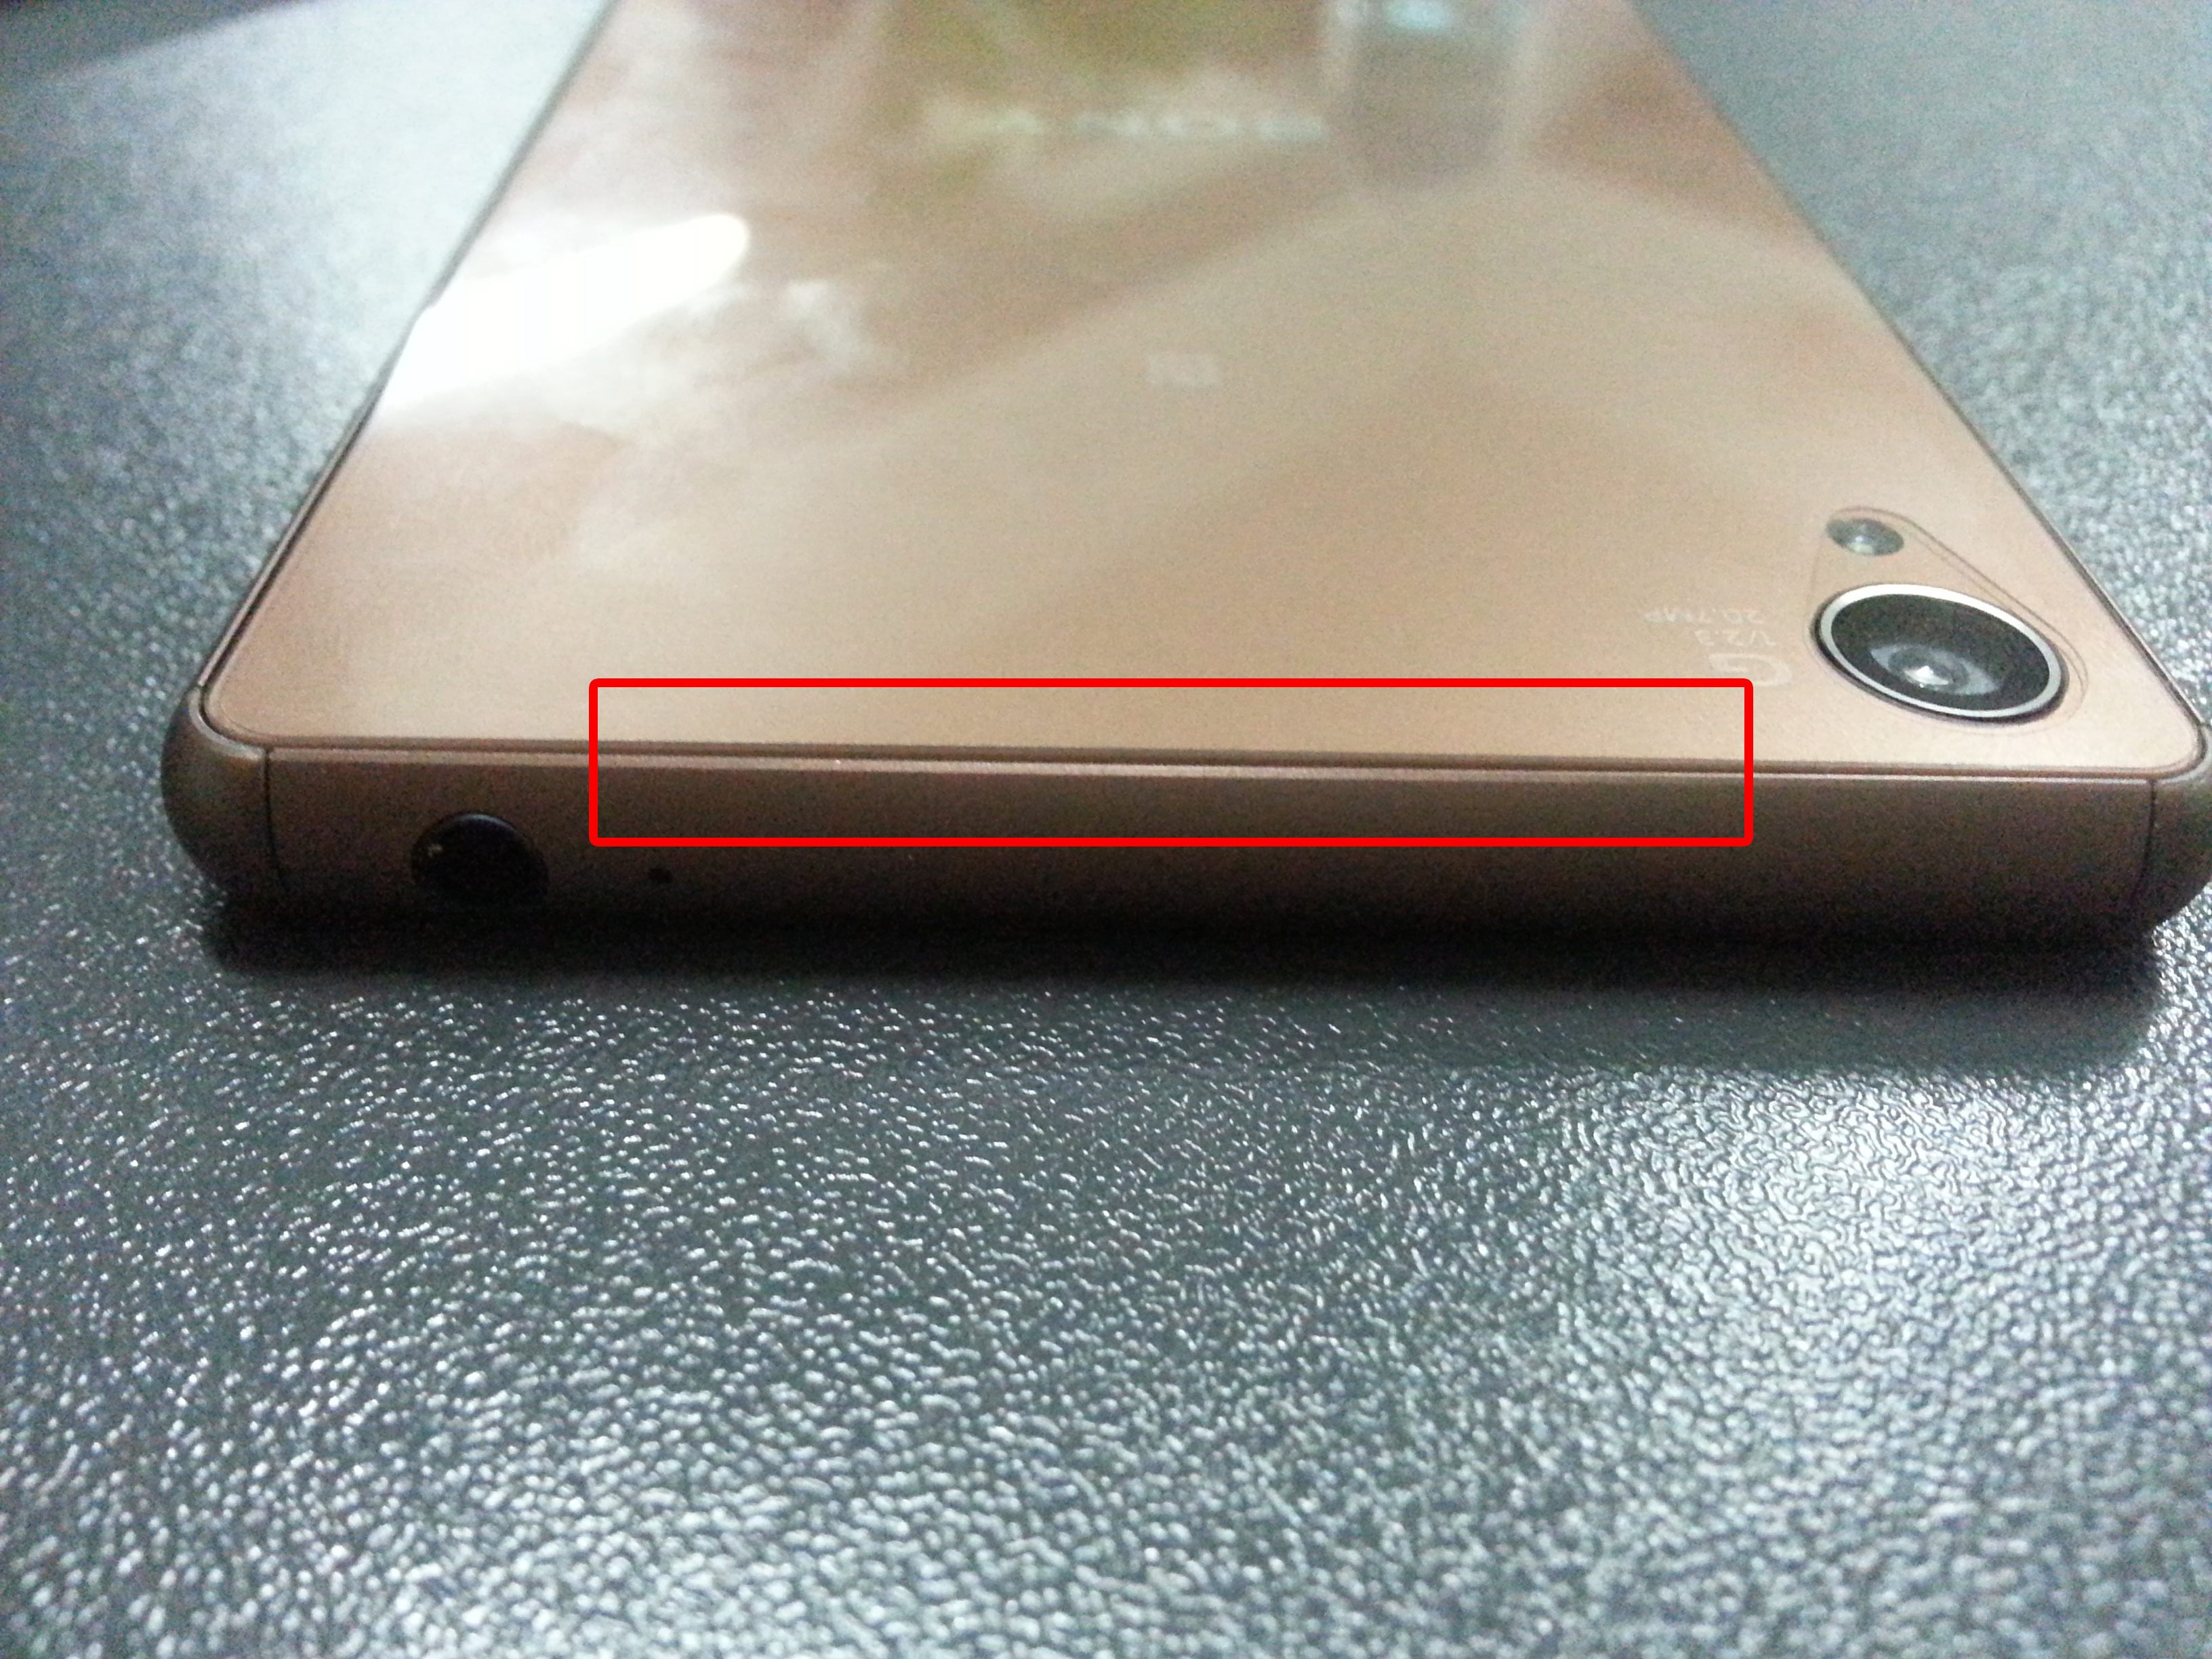 Xperia Z3 back cover lifting up